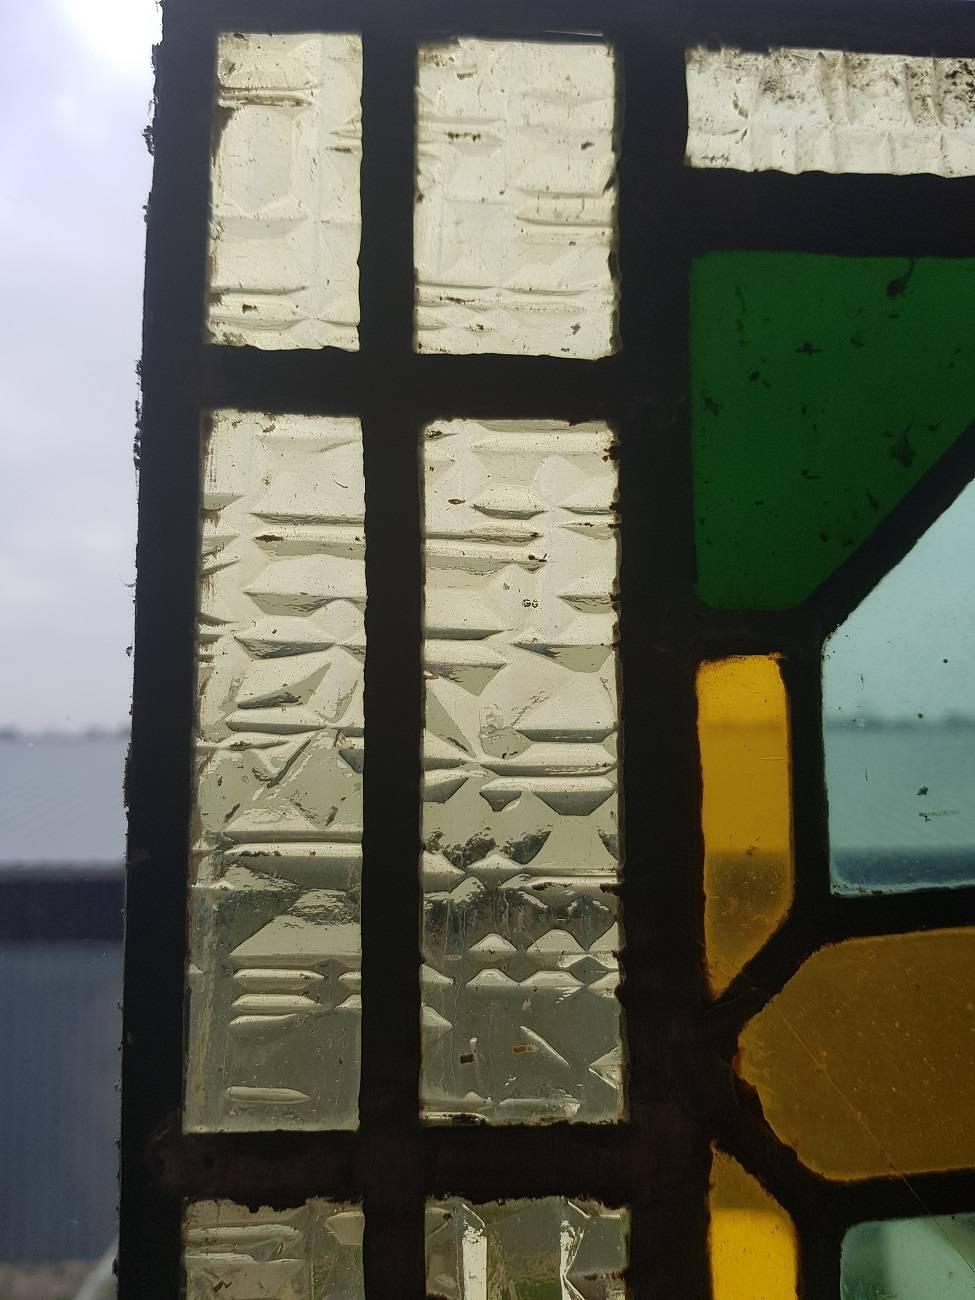 Hand-Crafted Late 19th Century Stained Glass Window from a Religious Building